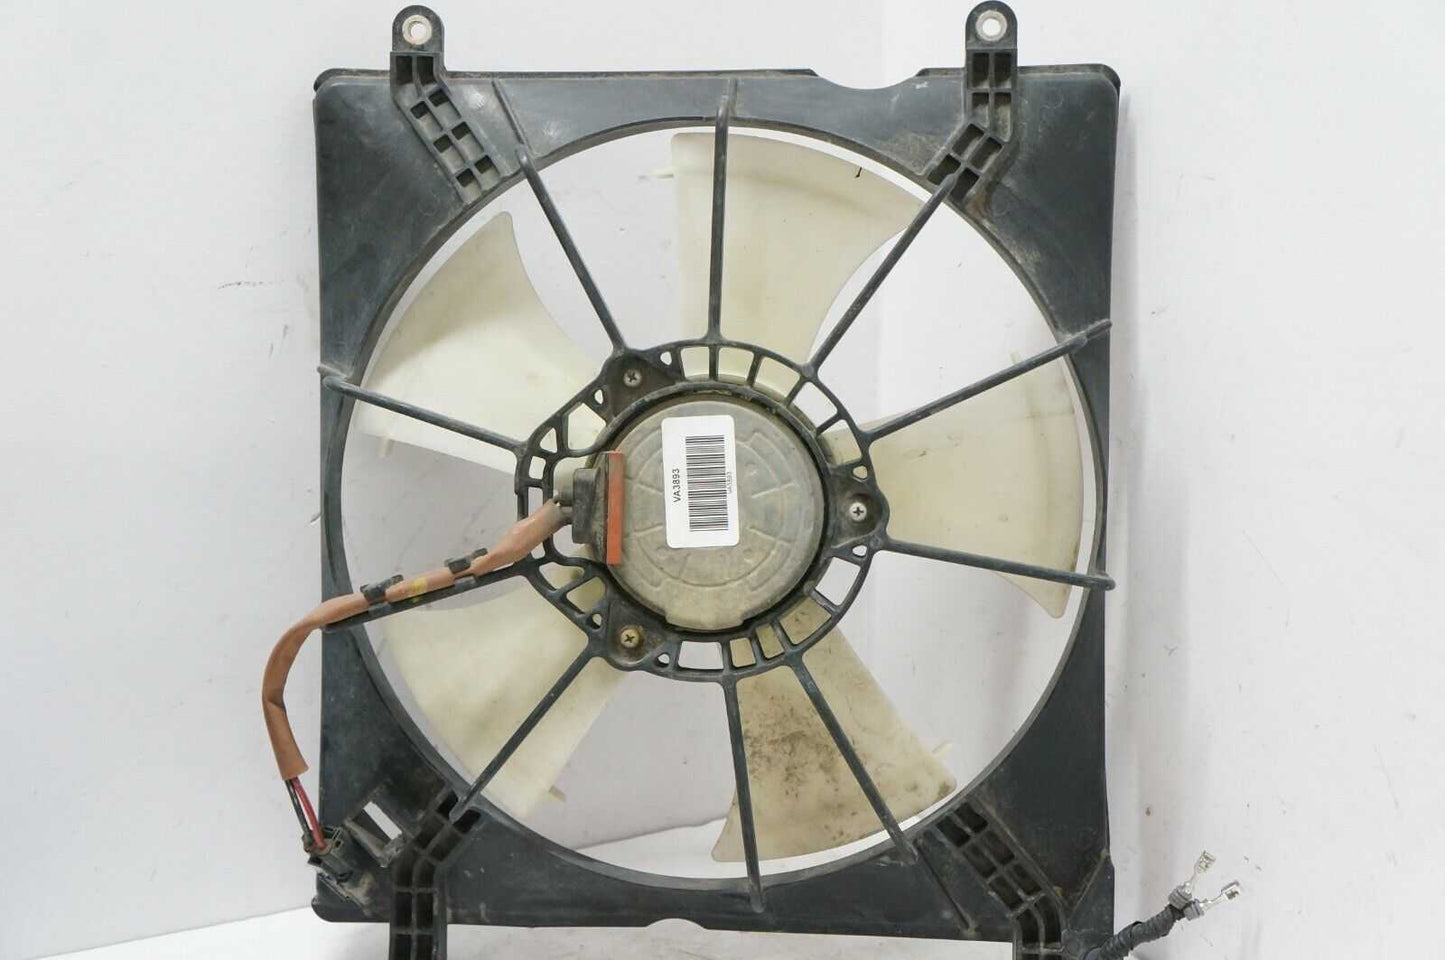 08-12 Honda Accord 2.4 L Radiator Cooling Fan Motor 5 Blades 38611-R40-A01 OEM Alshned Auto Parts